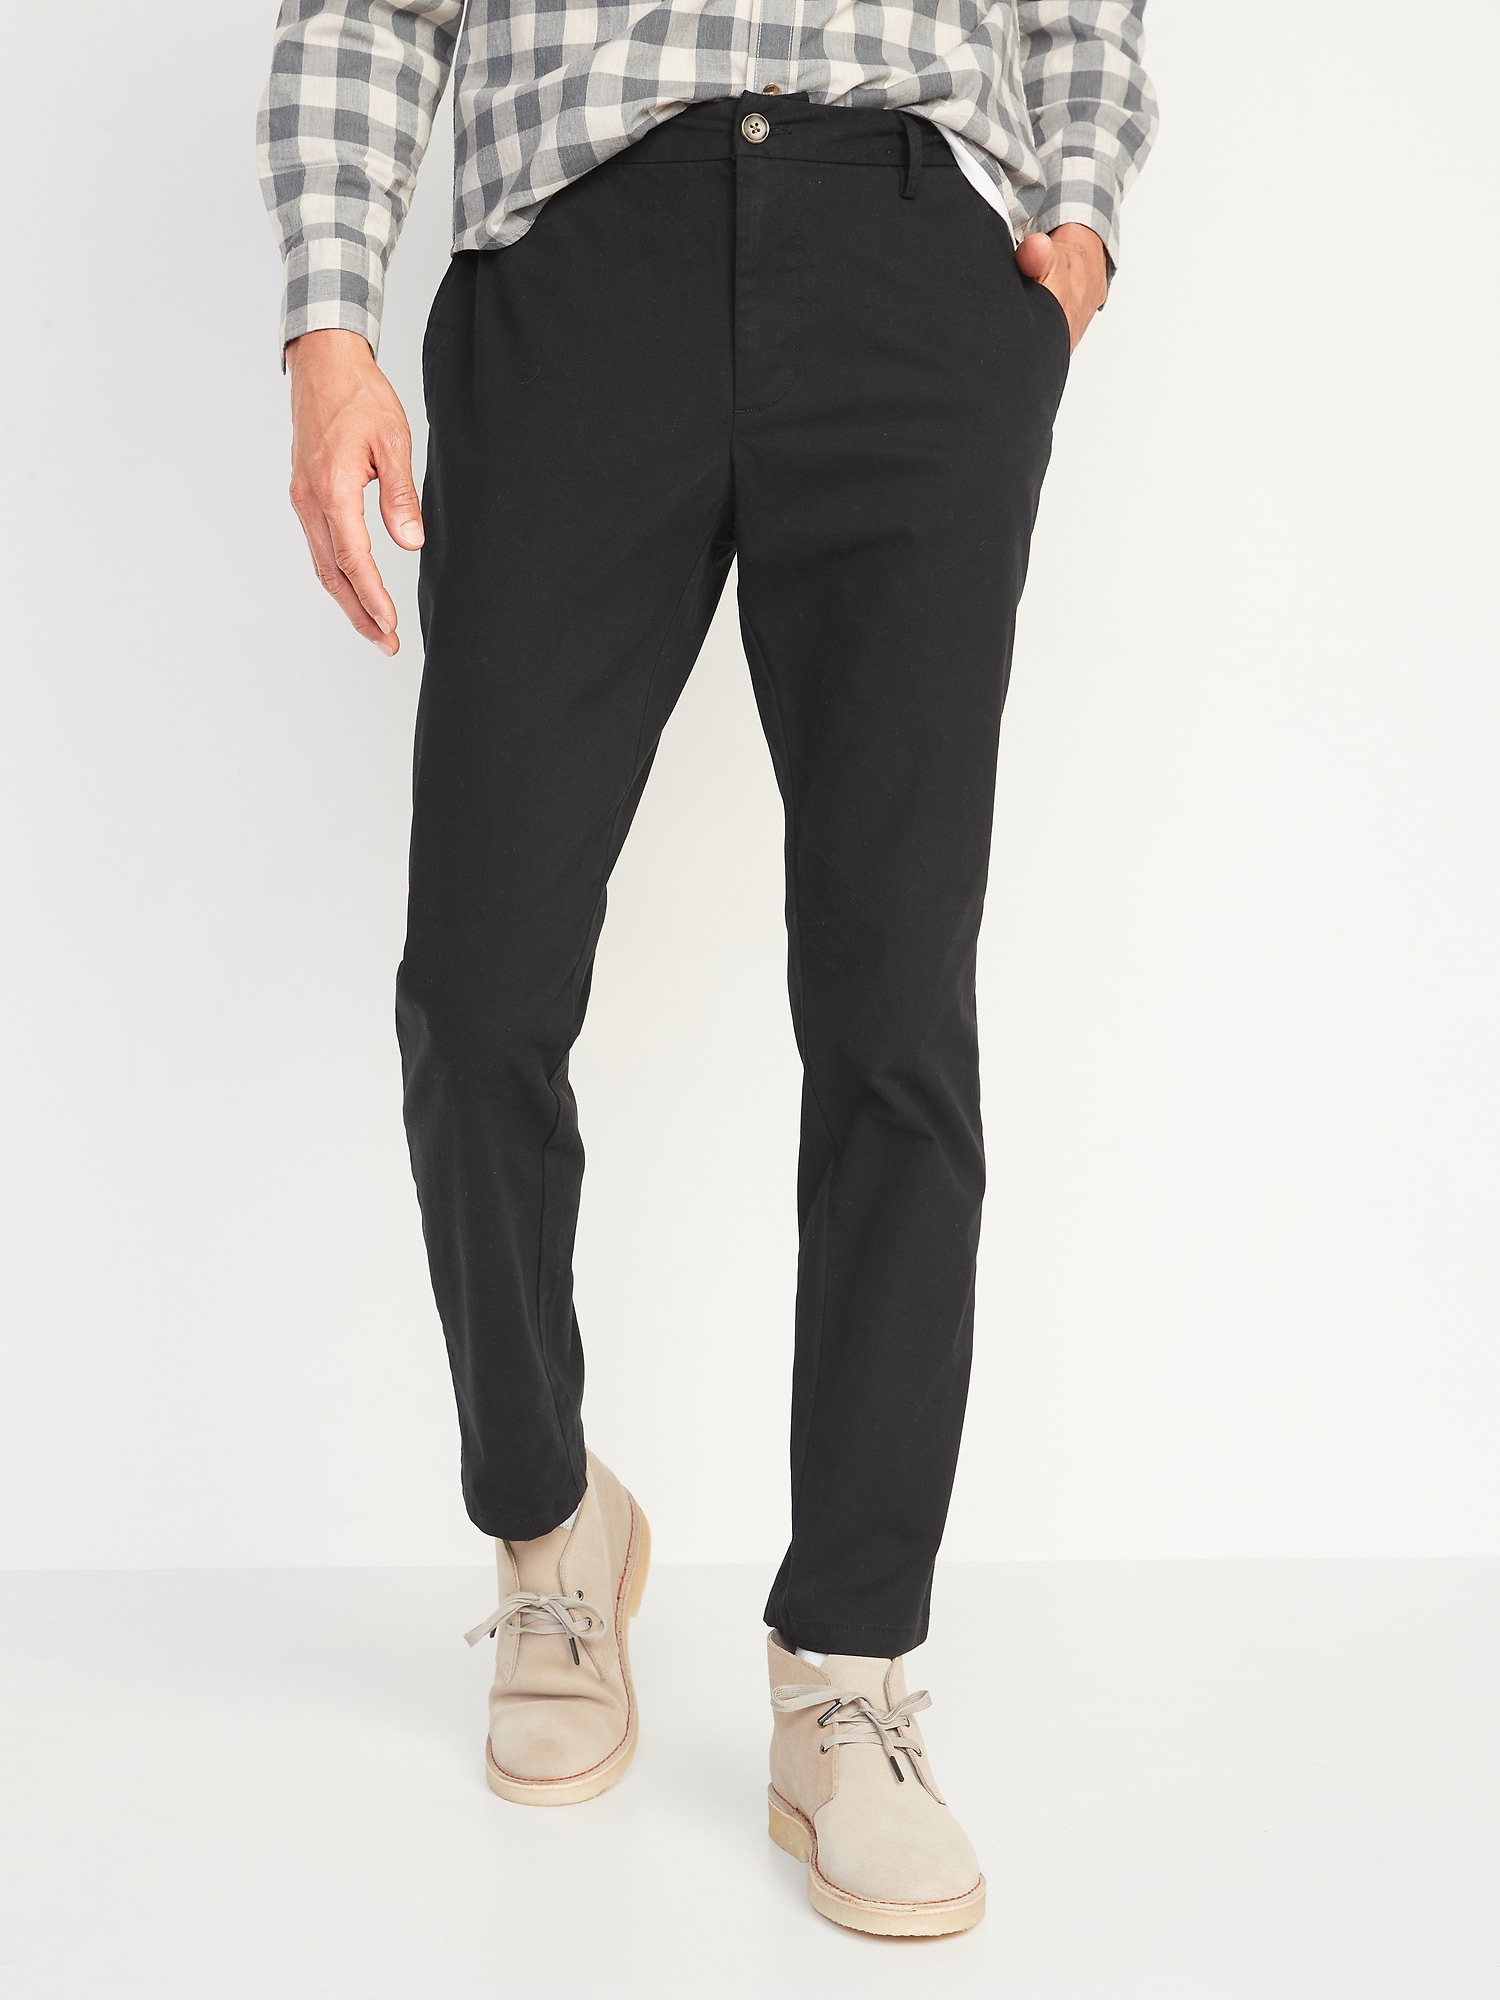 Old Navy Athletic Built-In Flex Rotation Chino Pants black. 1